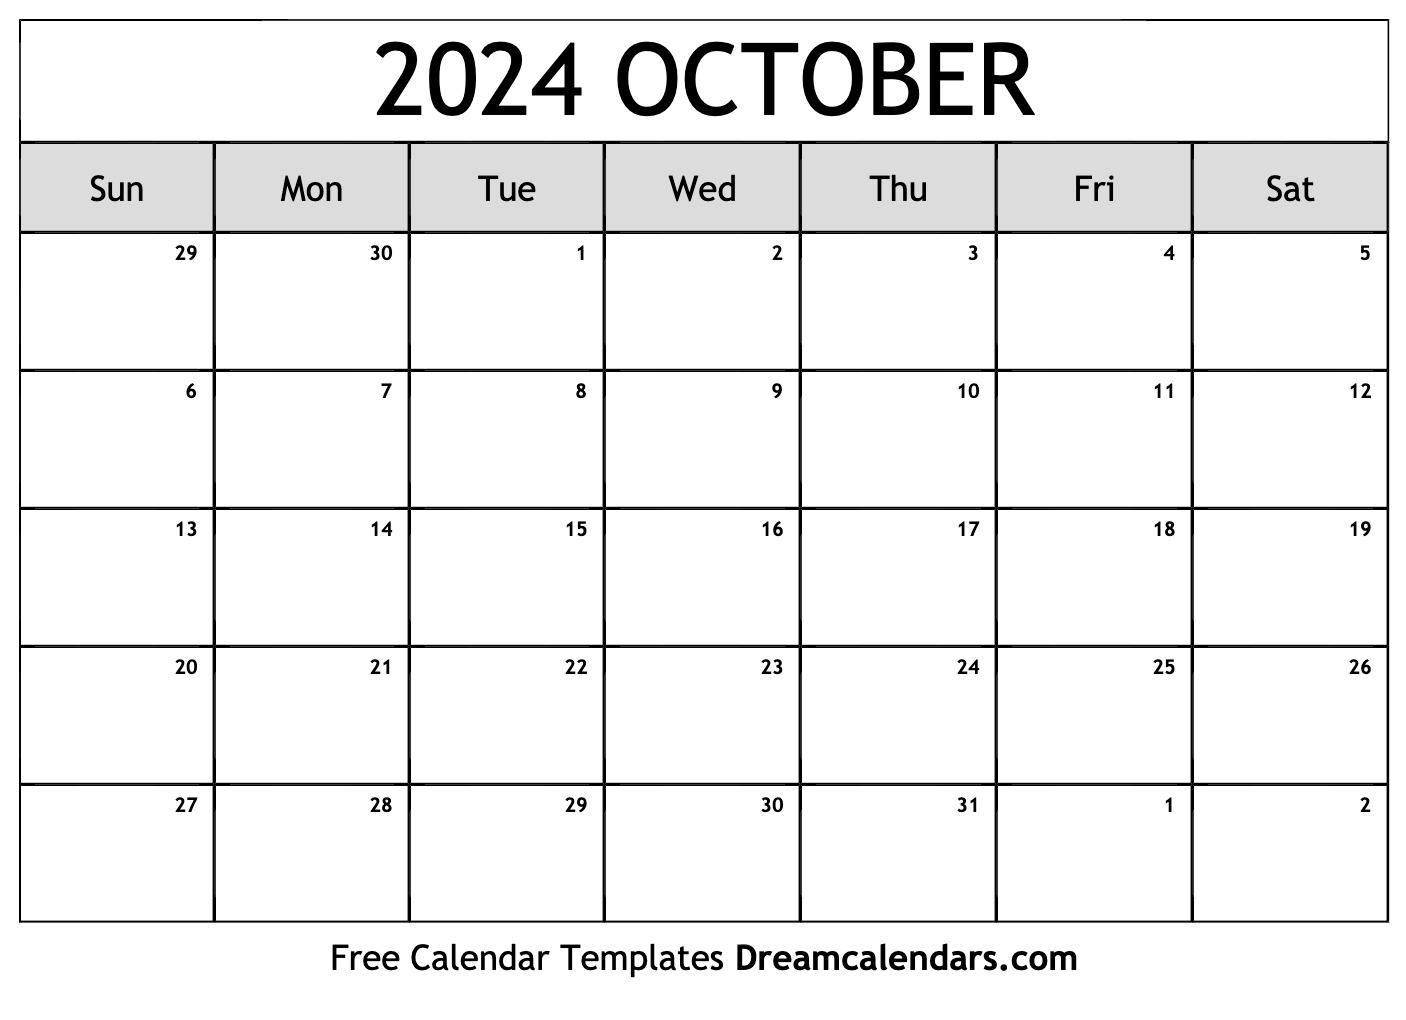 October 2024 Calendar Free Printable with Holidays and Observances